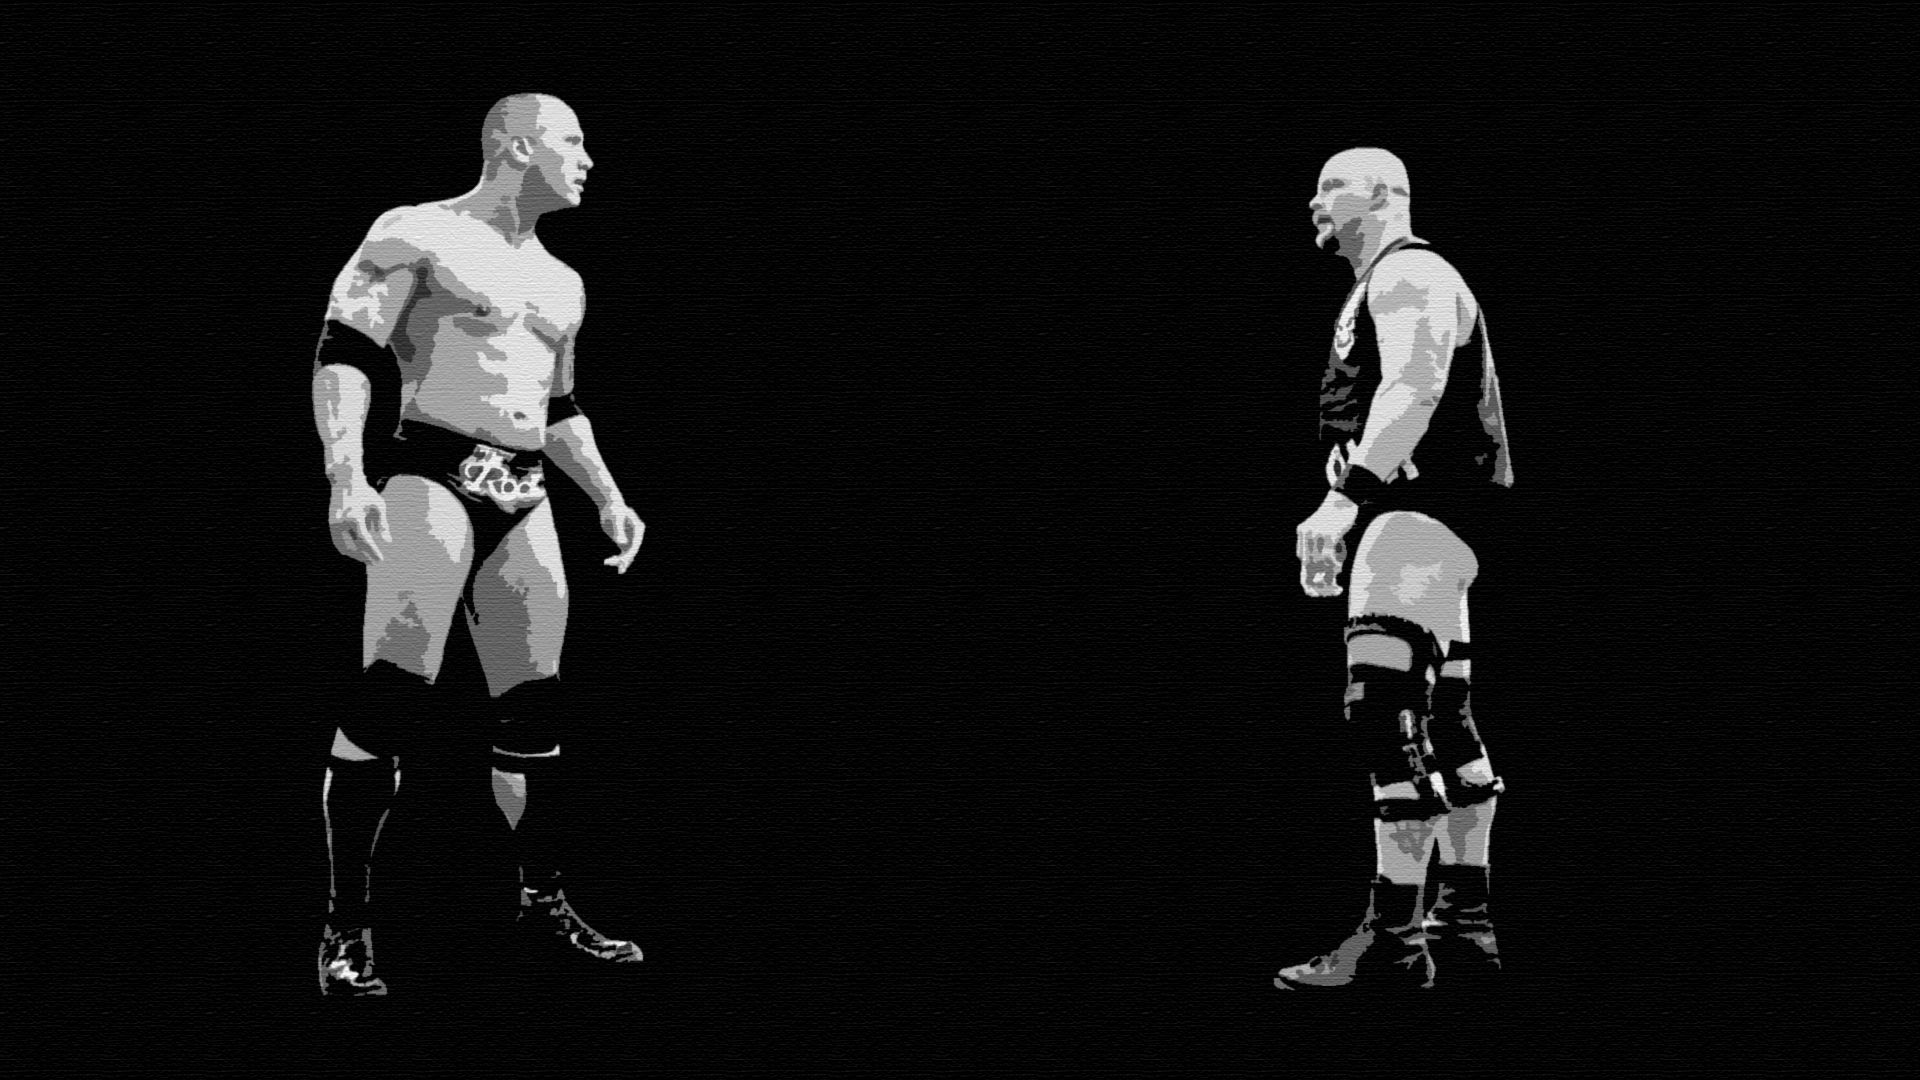 Super Wrestling Wallpaper - Wwe The Rock And Stone Cold - HD Wallpaper 